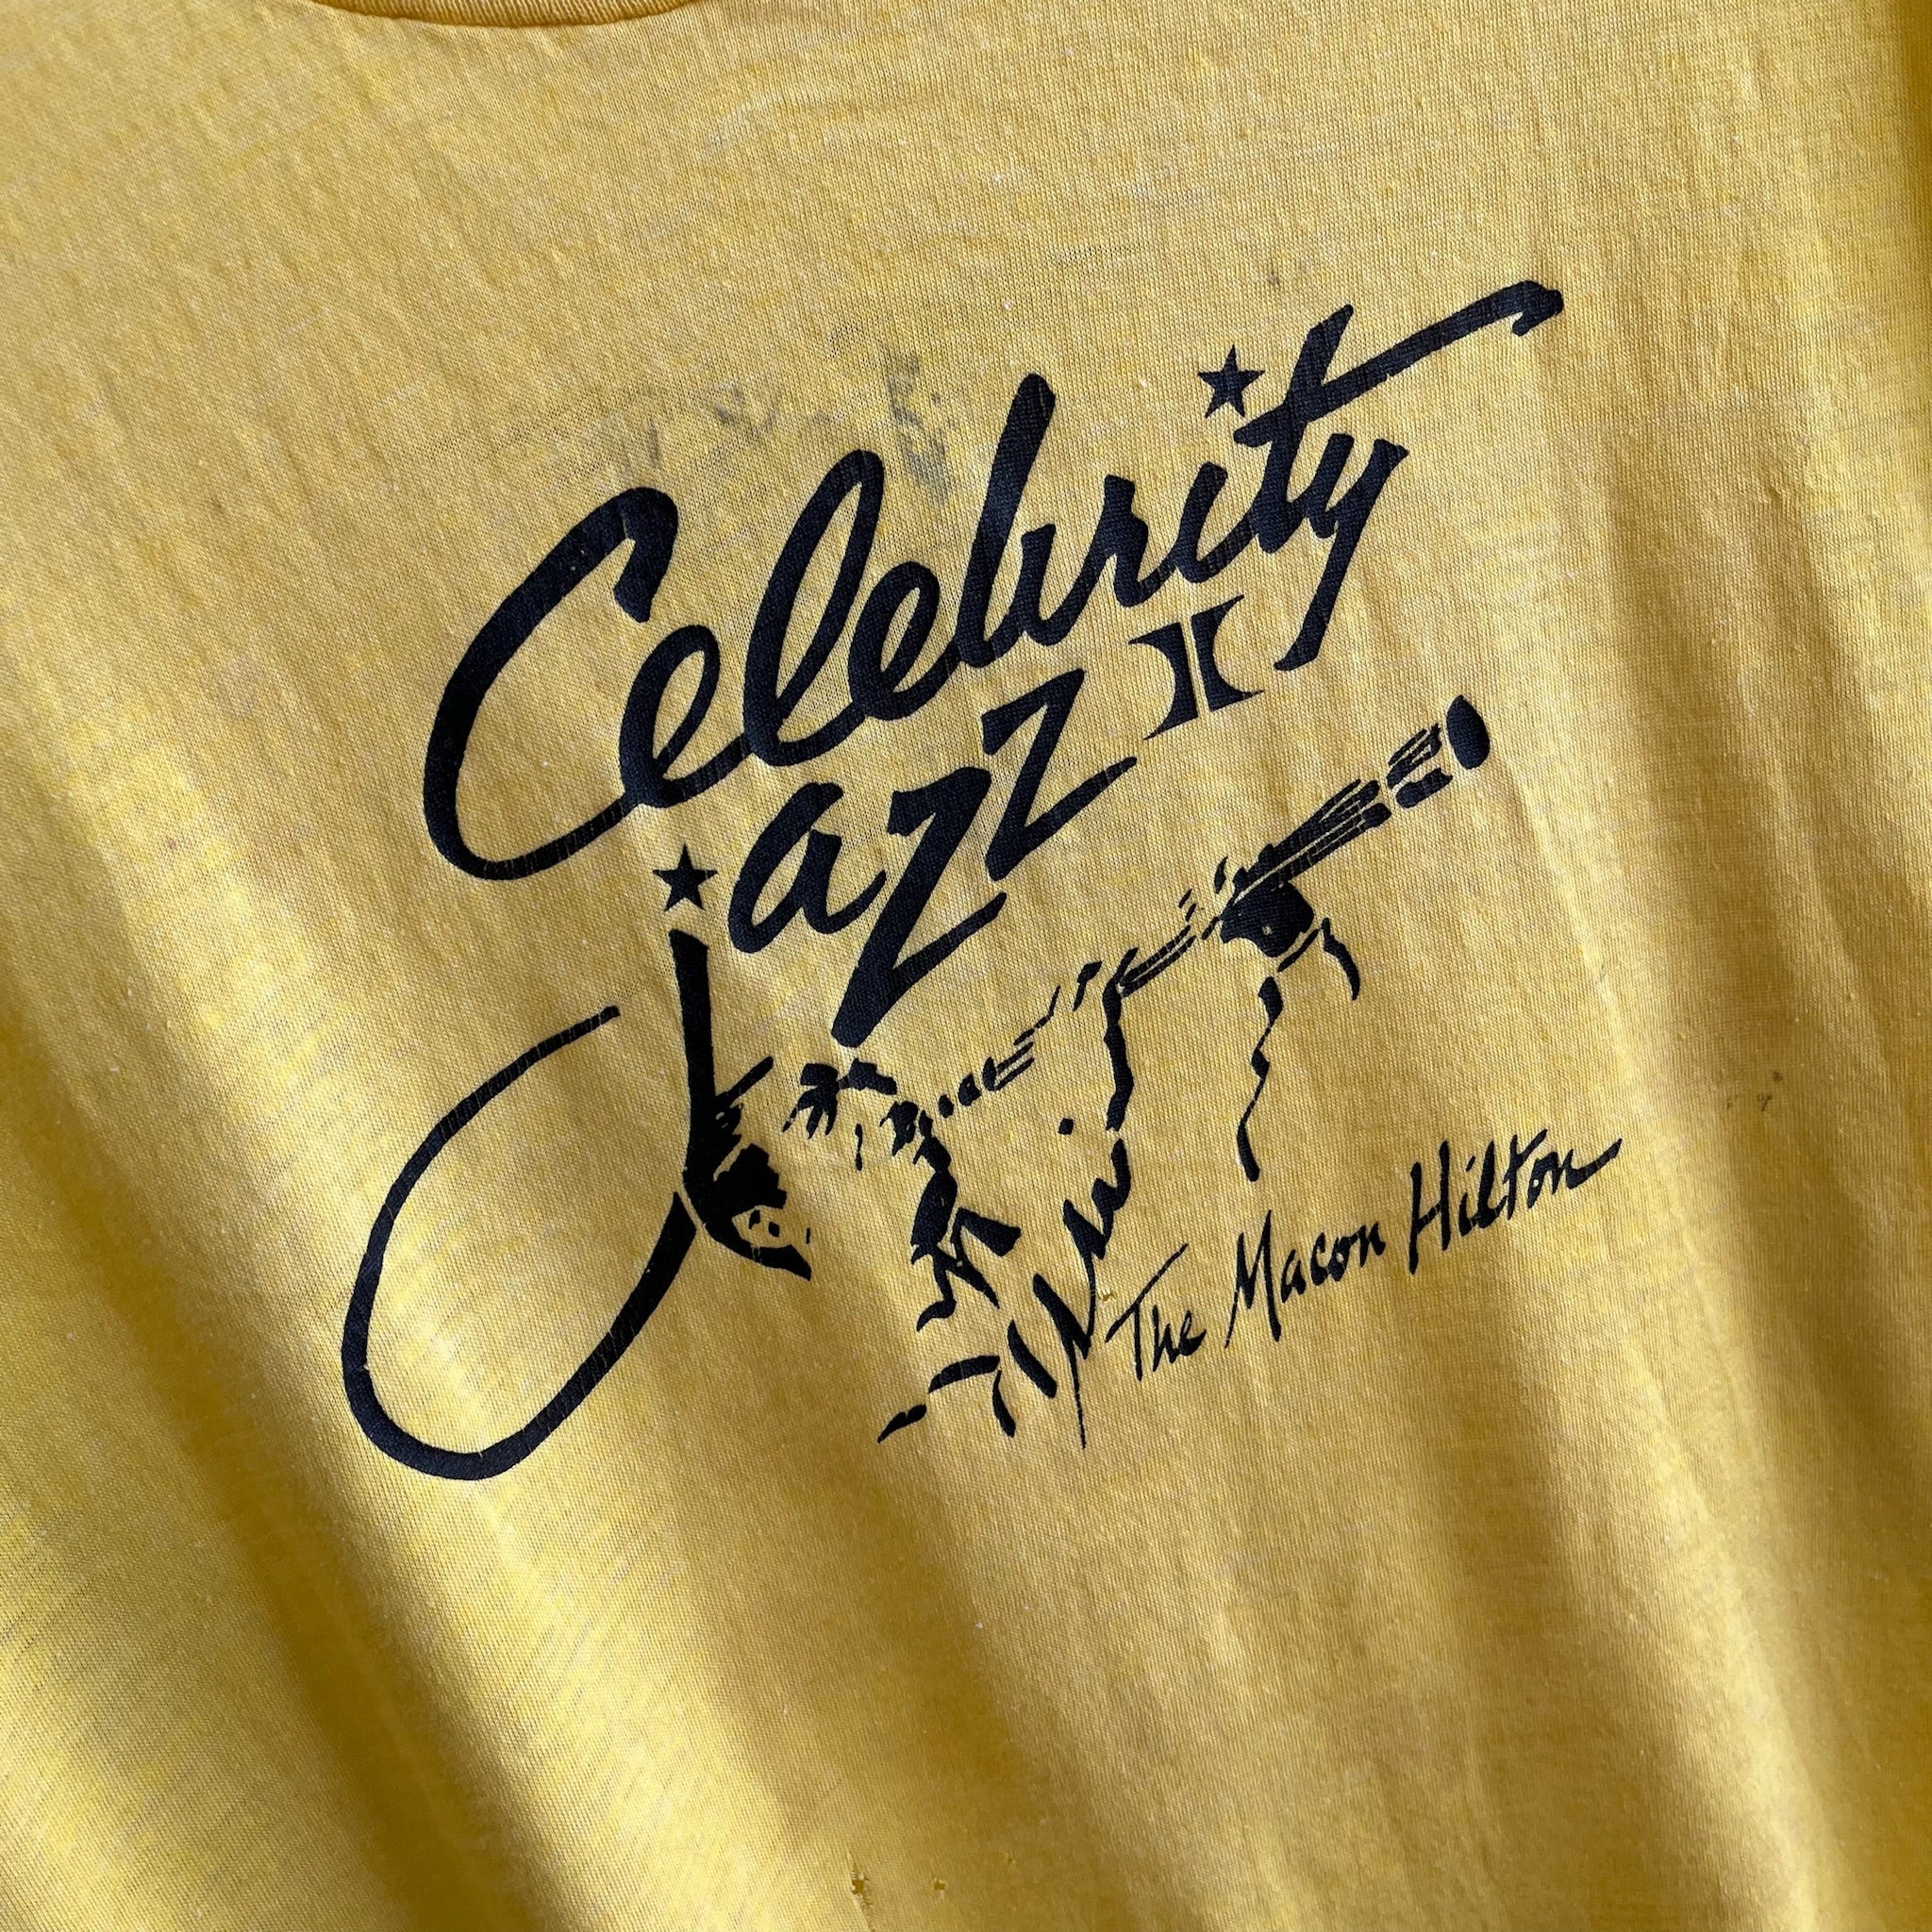 1970s Super Stained Celebrity Jazz - The Macon Hilton - T-Shirt